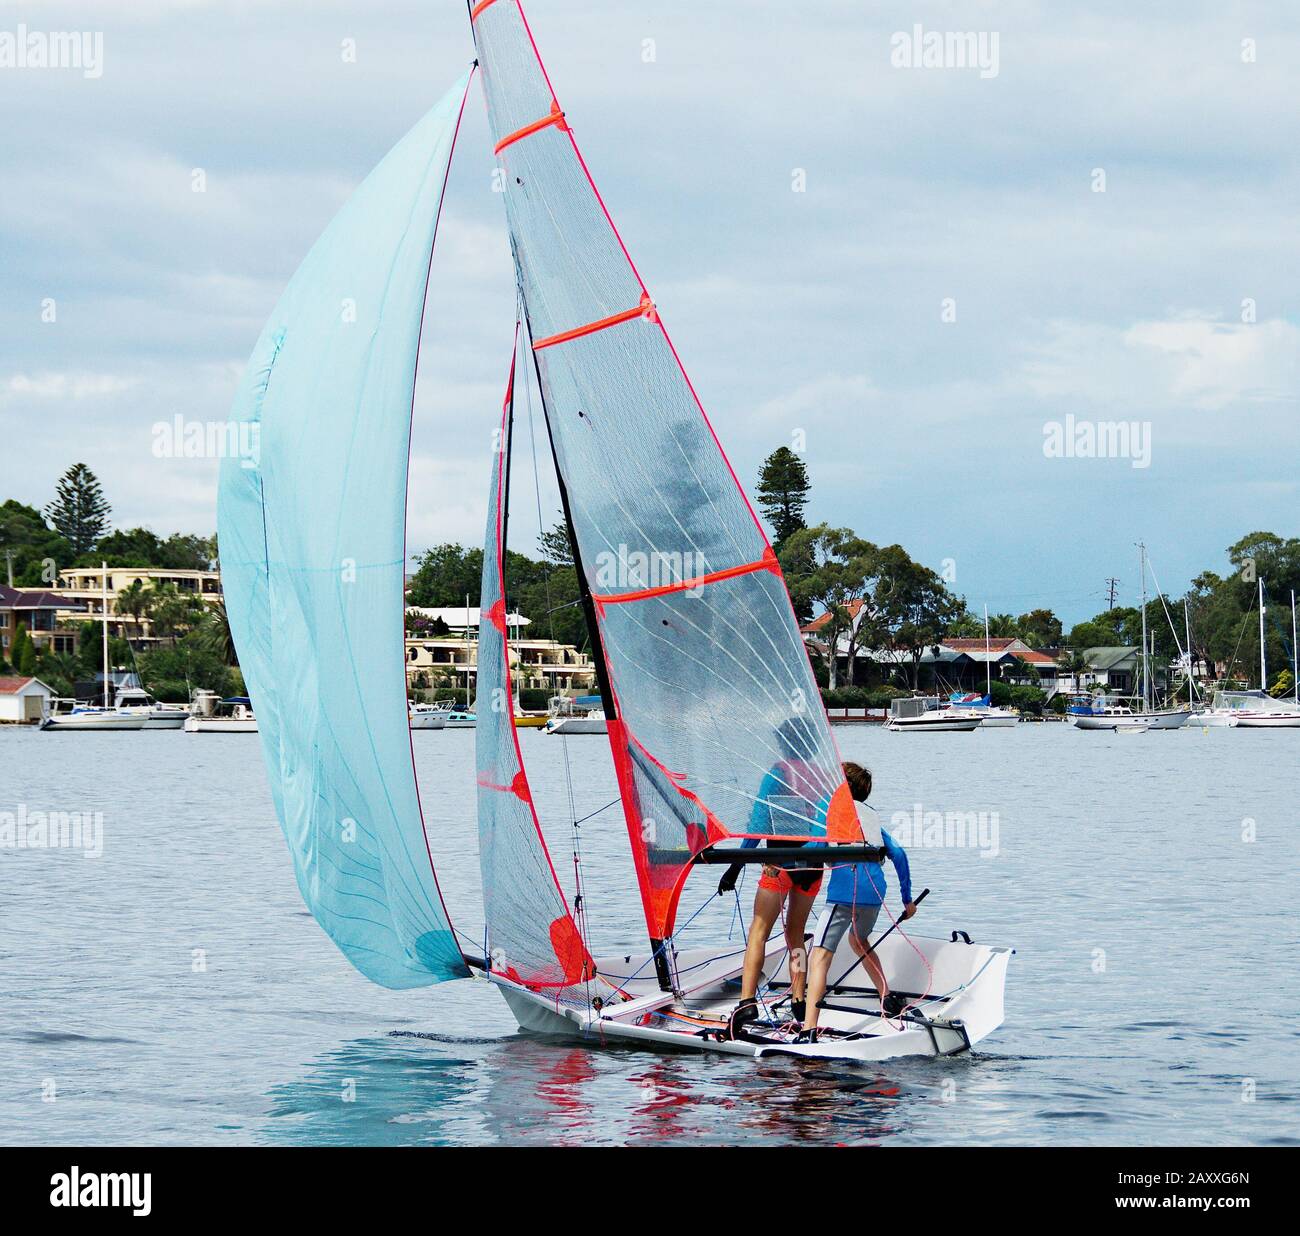 Two young boys sailing a 29er class dinghy with a clear mylar mainsail in competition. Teamwork by junior sailors racing on saltwater Lake Macquarie. Stock Photo